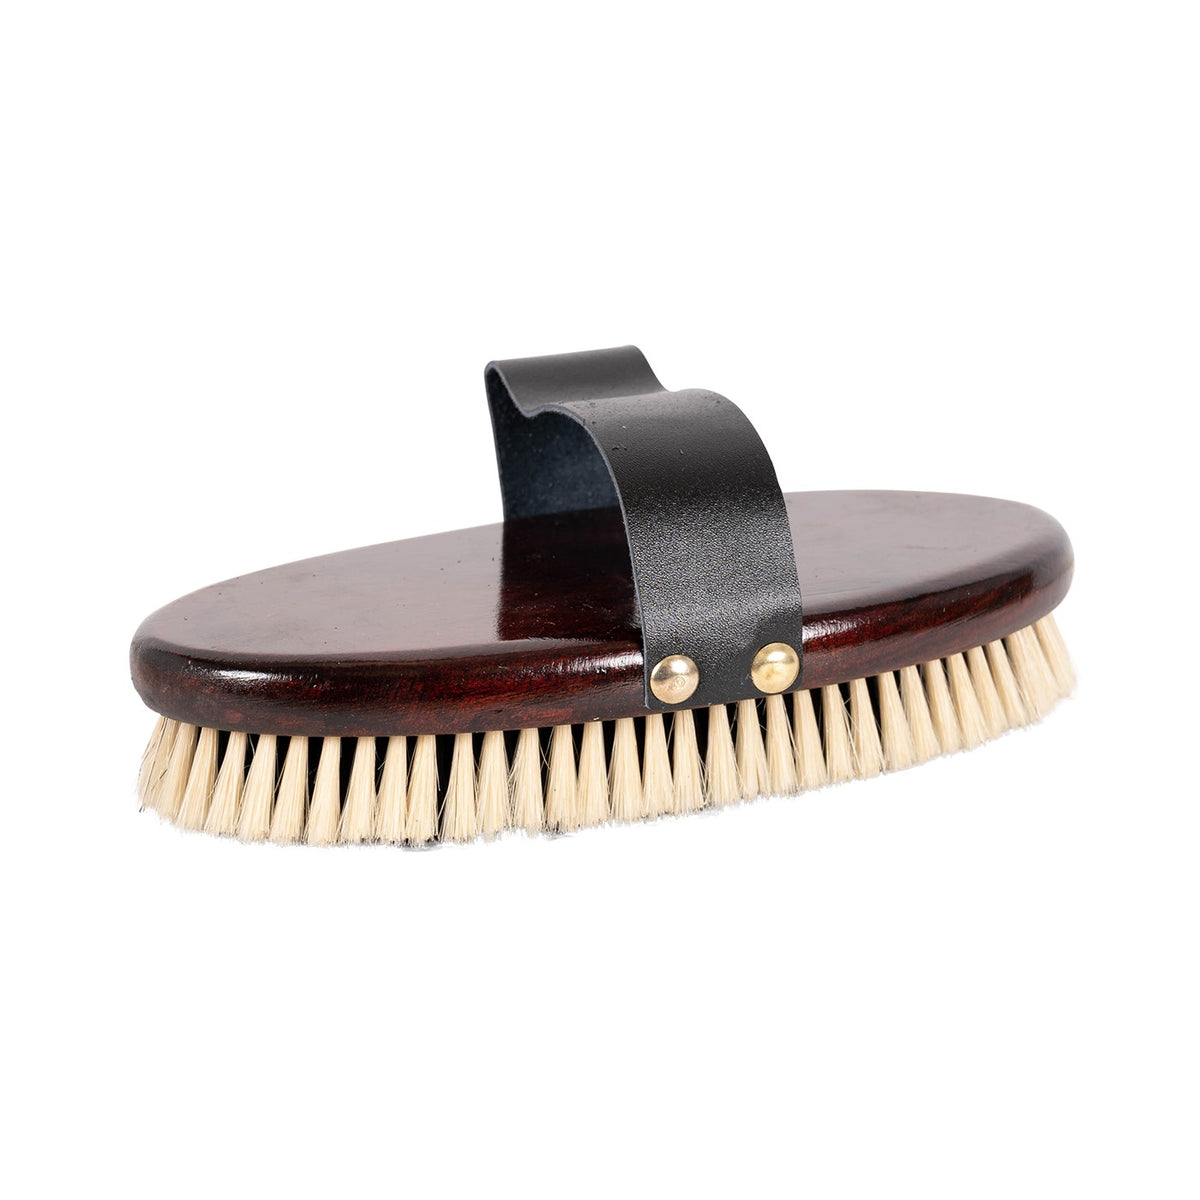 LEGENDS #32 STIFF SYNTHETIC BRISTLED BRUSH - Deer Park, NY - The Barn Pet  Feed & Supplies